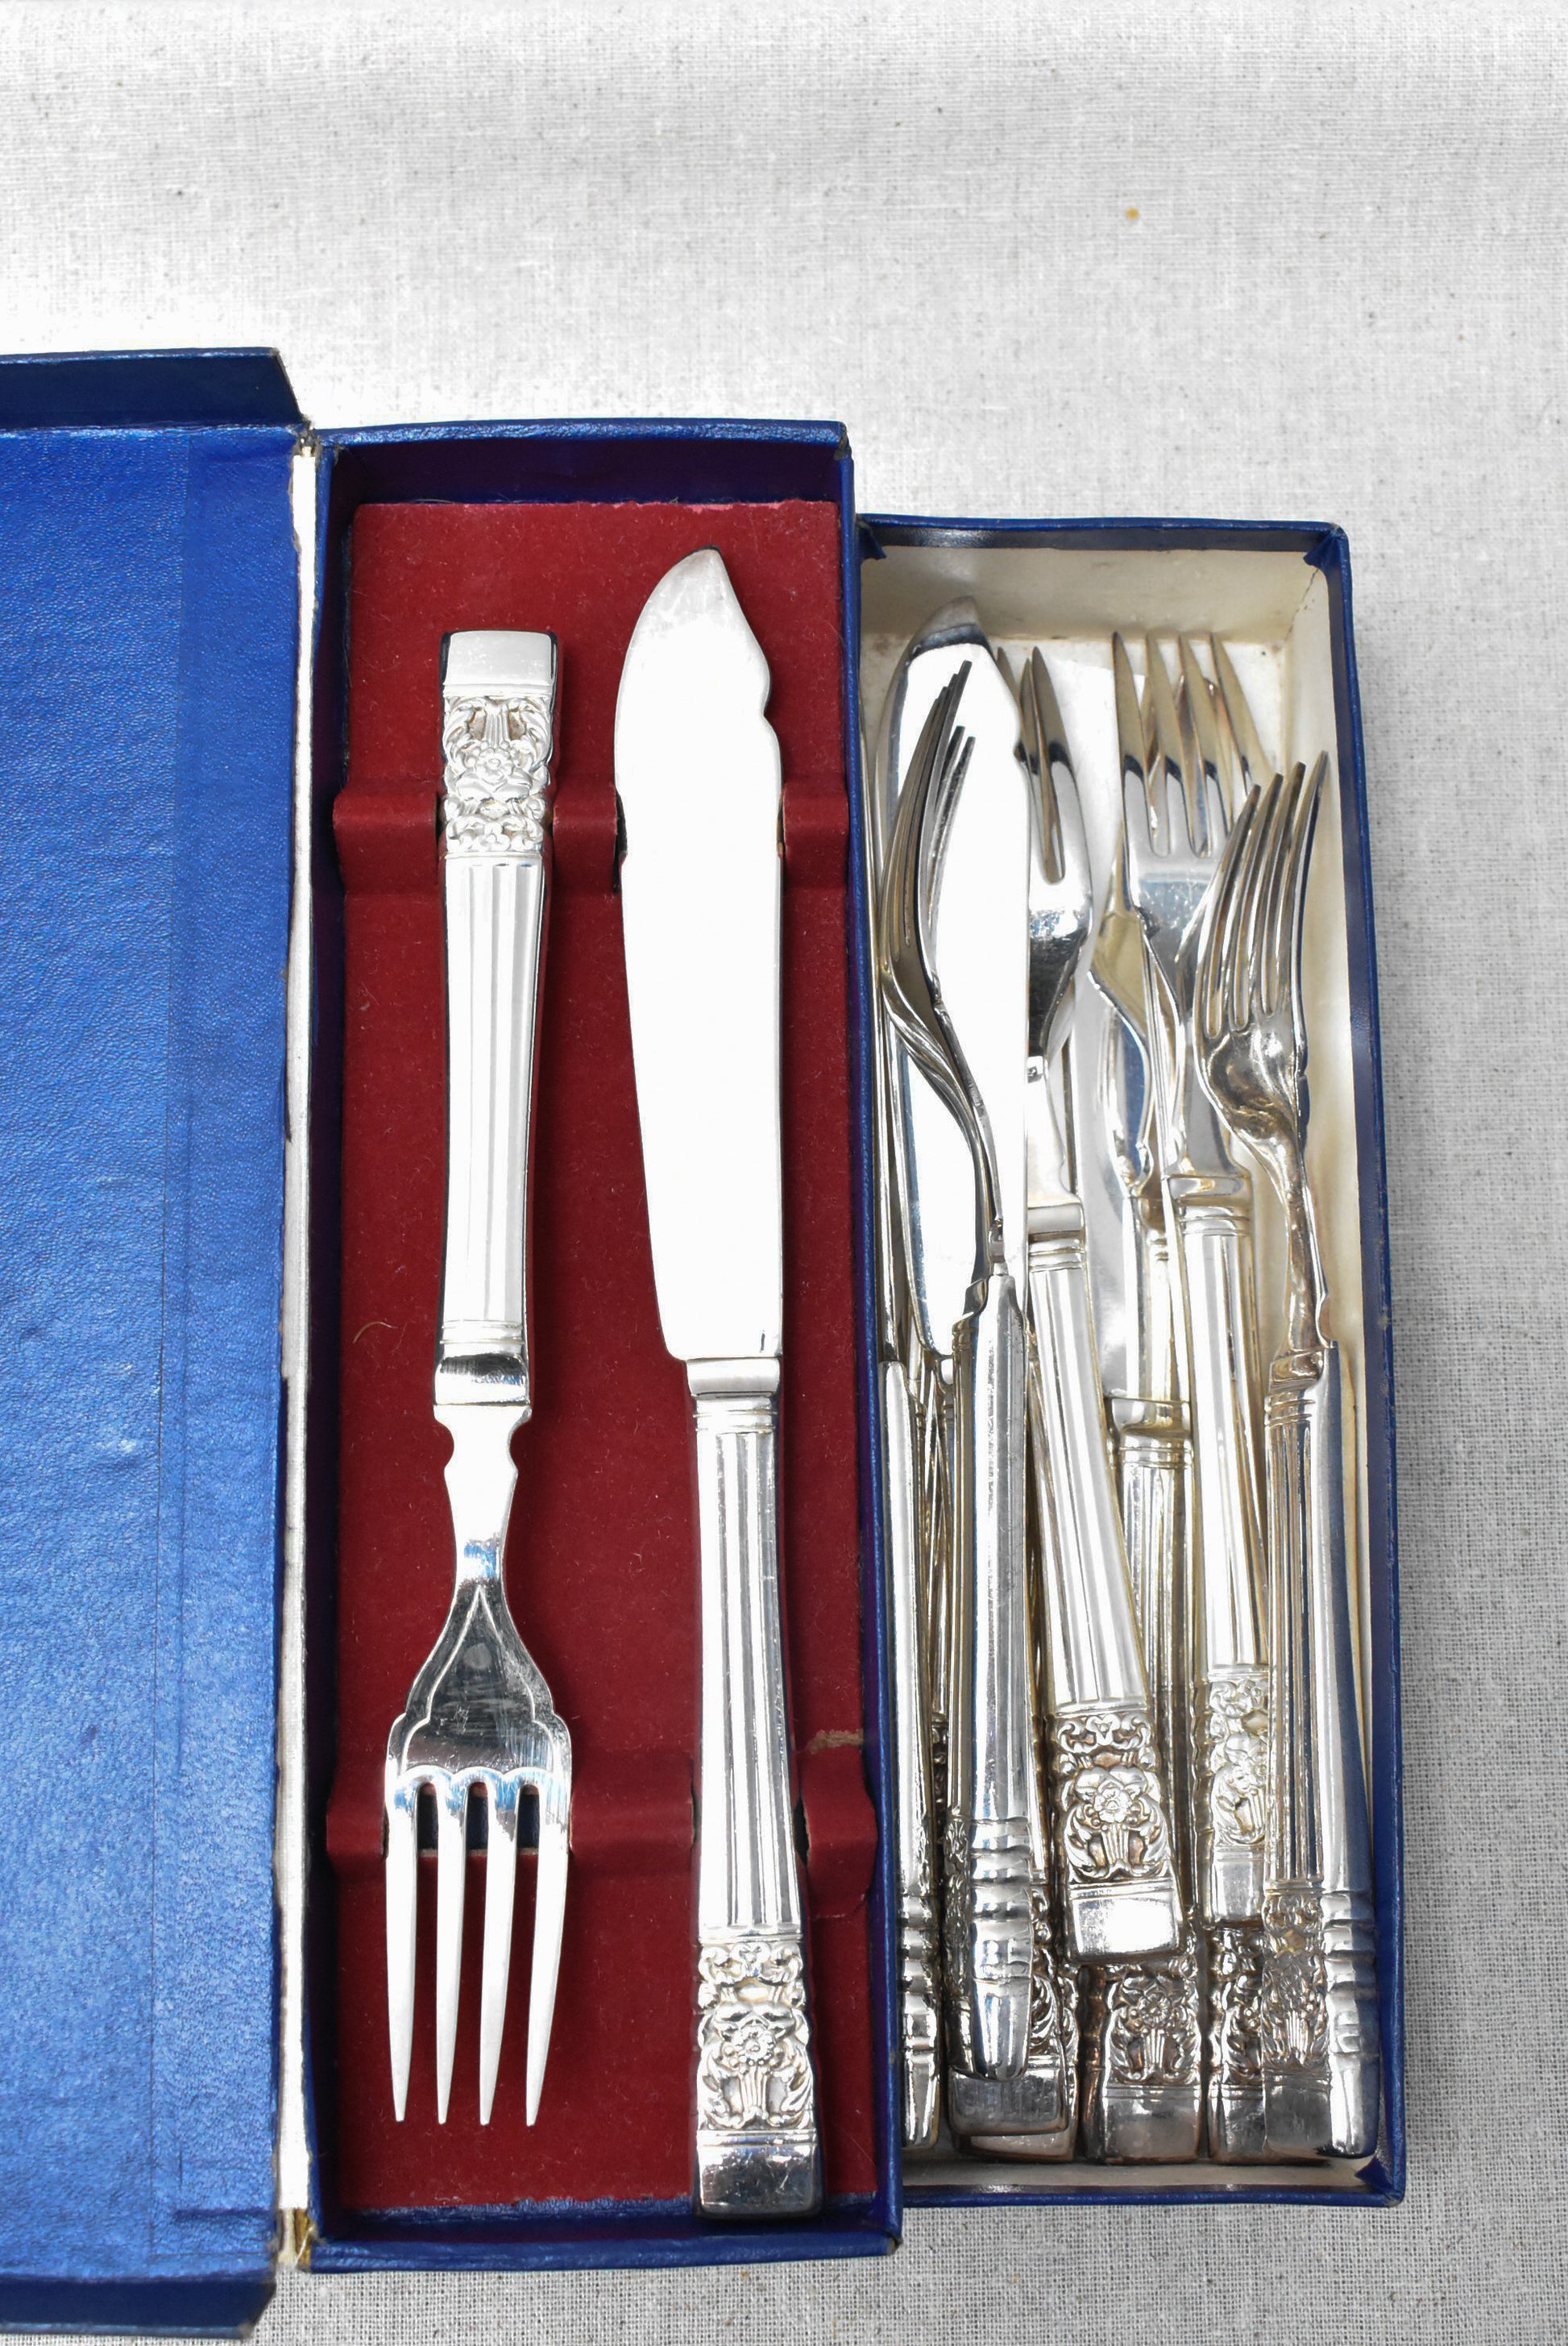 Community Plate Fish knives and fork set 6 – Shop on Carroll Online